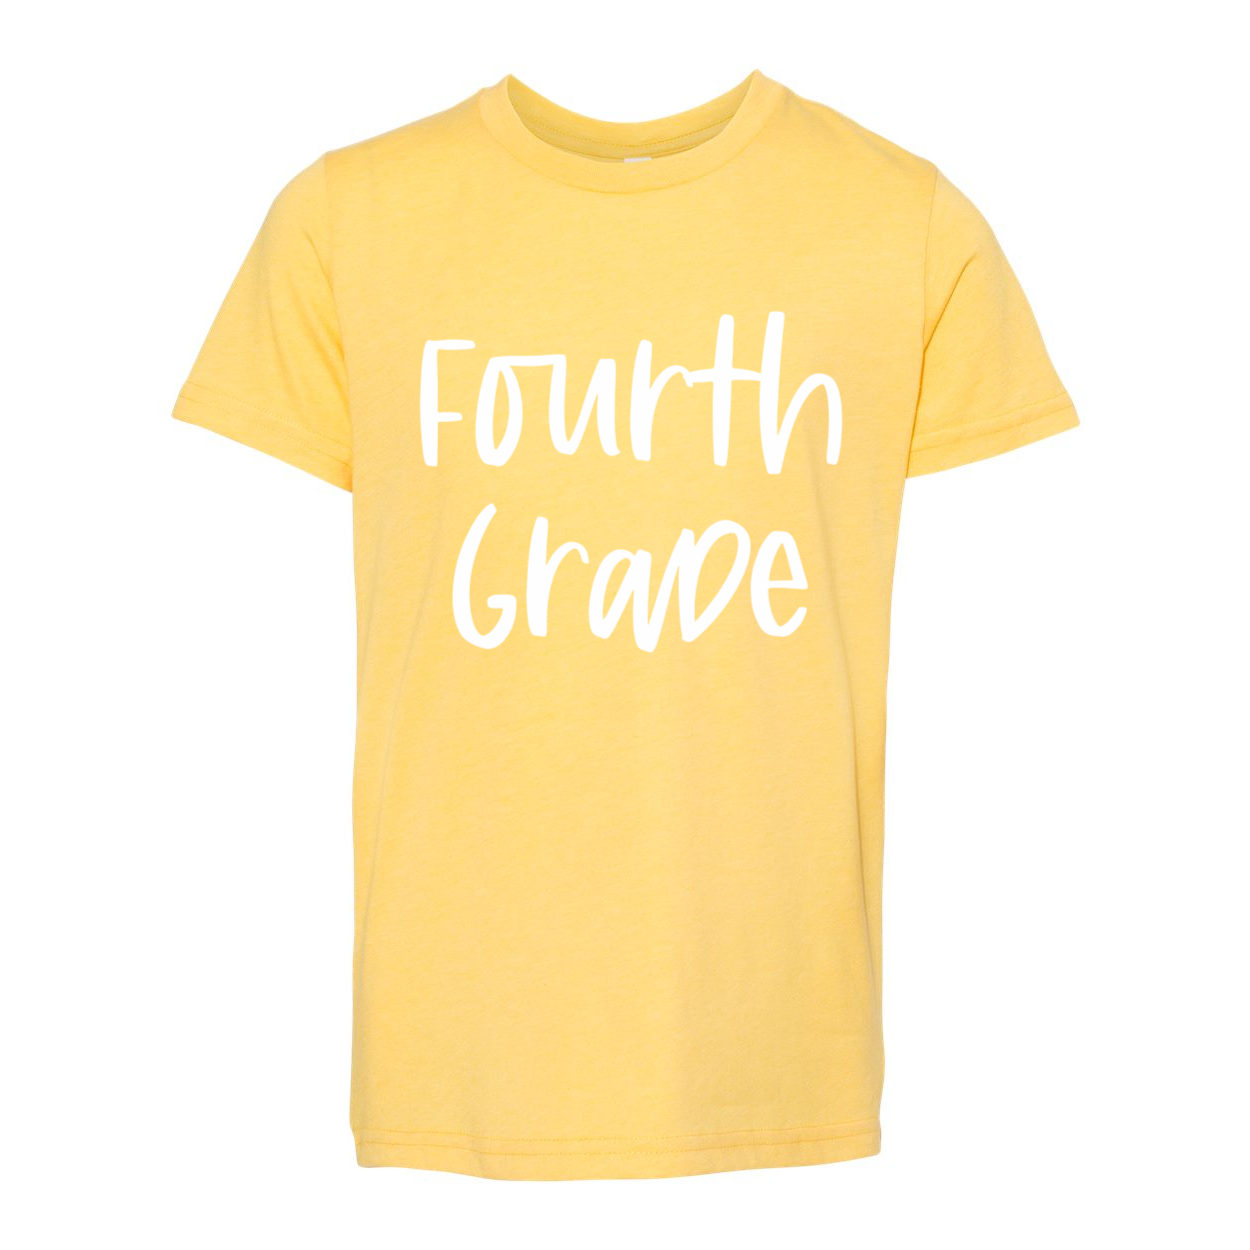 Fourth Grade YOUTH Script Tee